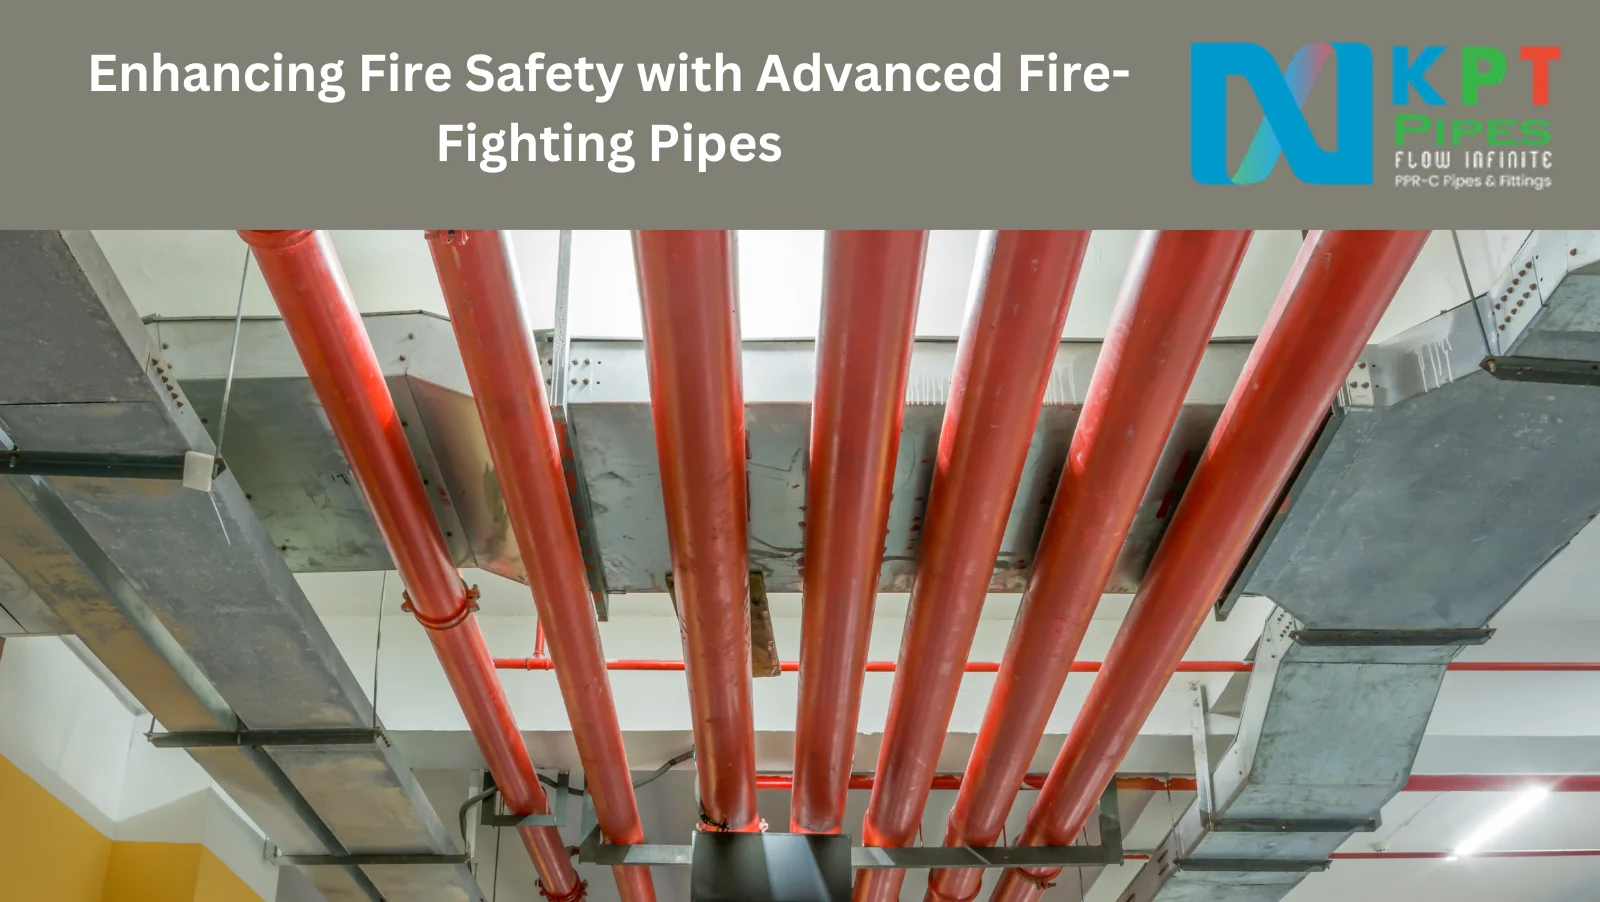 Fire-Fighting Pipes